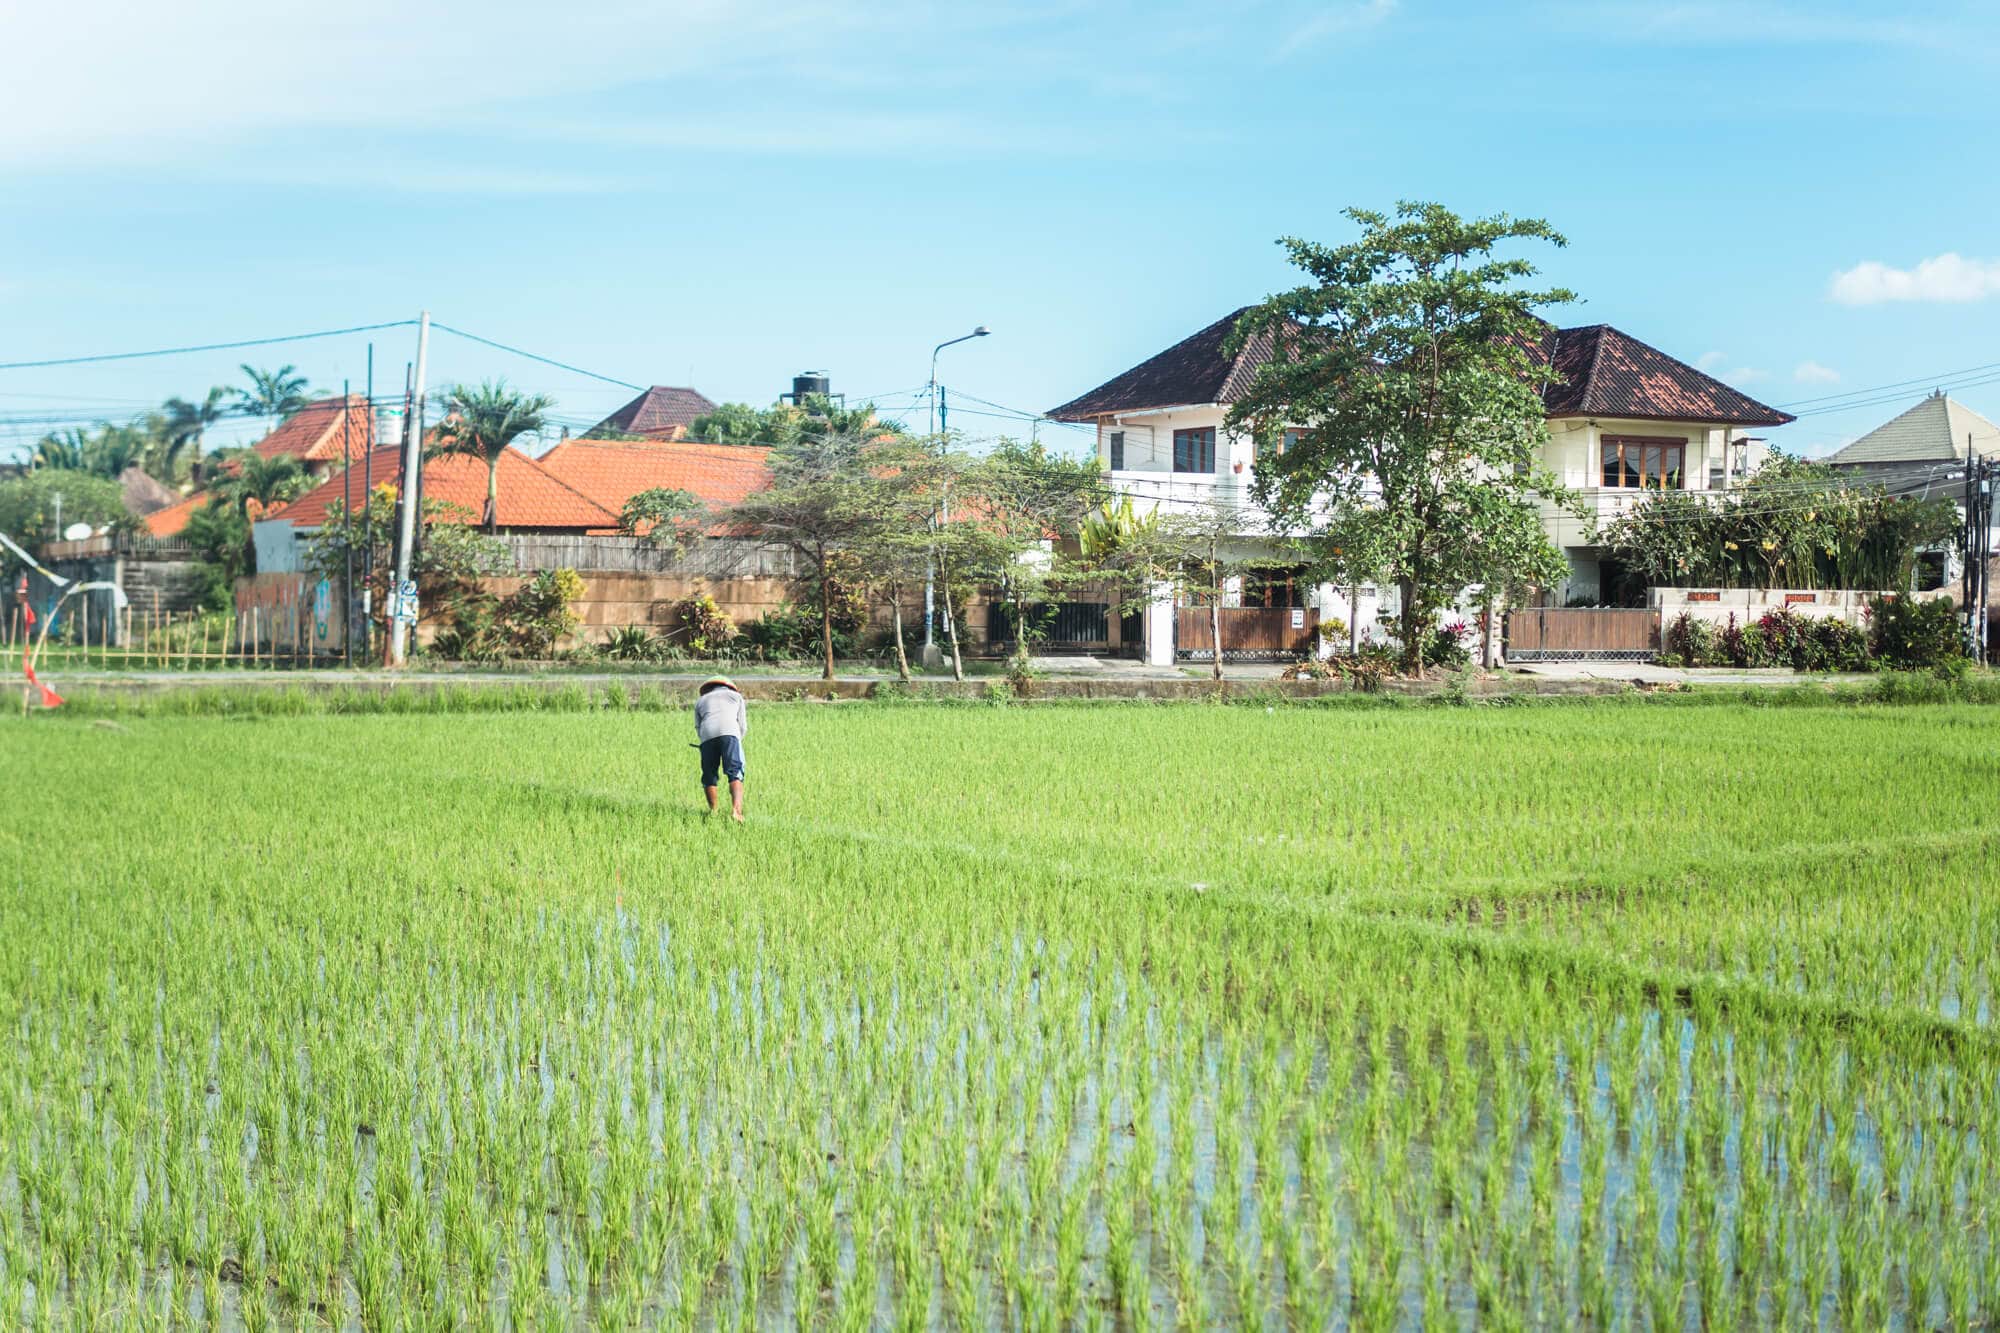 Coworking spaces in Canggu, Bali - Rice field in the middle of Canggu